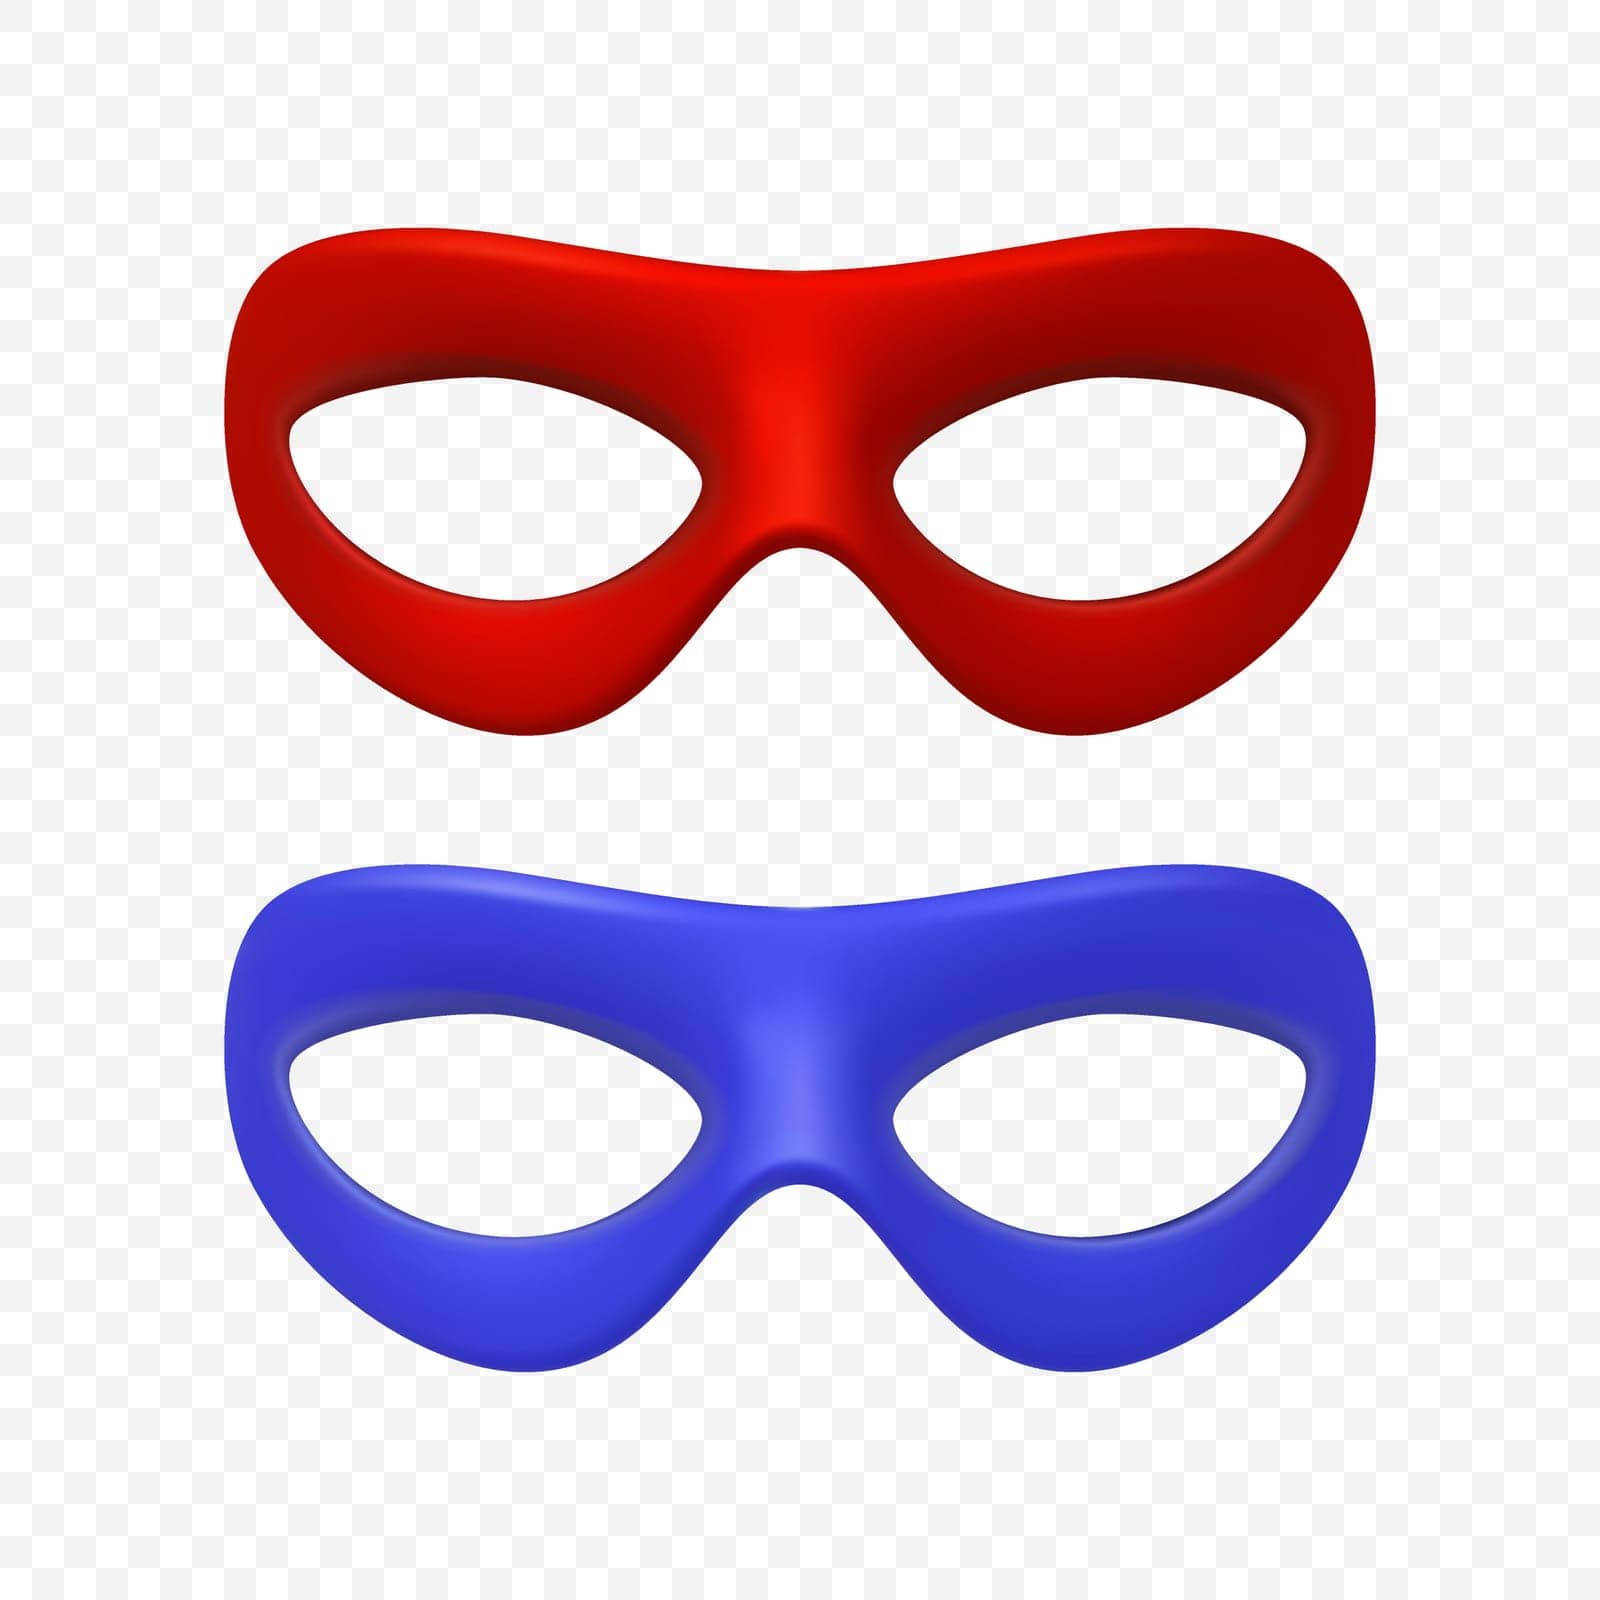 Vector Red and Blue Super Hero Mask Set. Face Character, Superhero Comic Book Mask Closeup. Superhero Photo Prop, Carnival Face Mask, Glasses. Comic Book Concept for Costume Parties and Events.